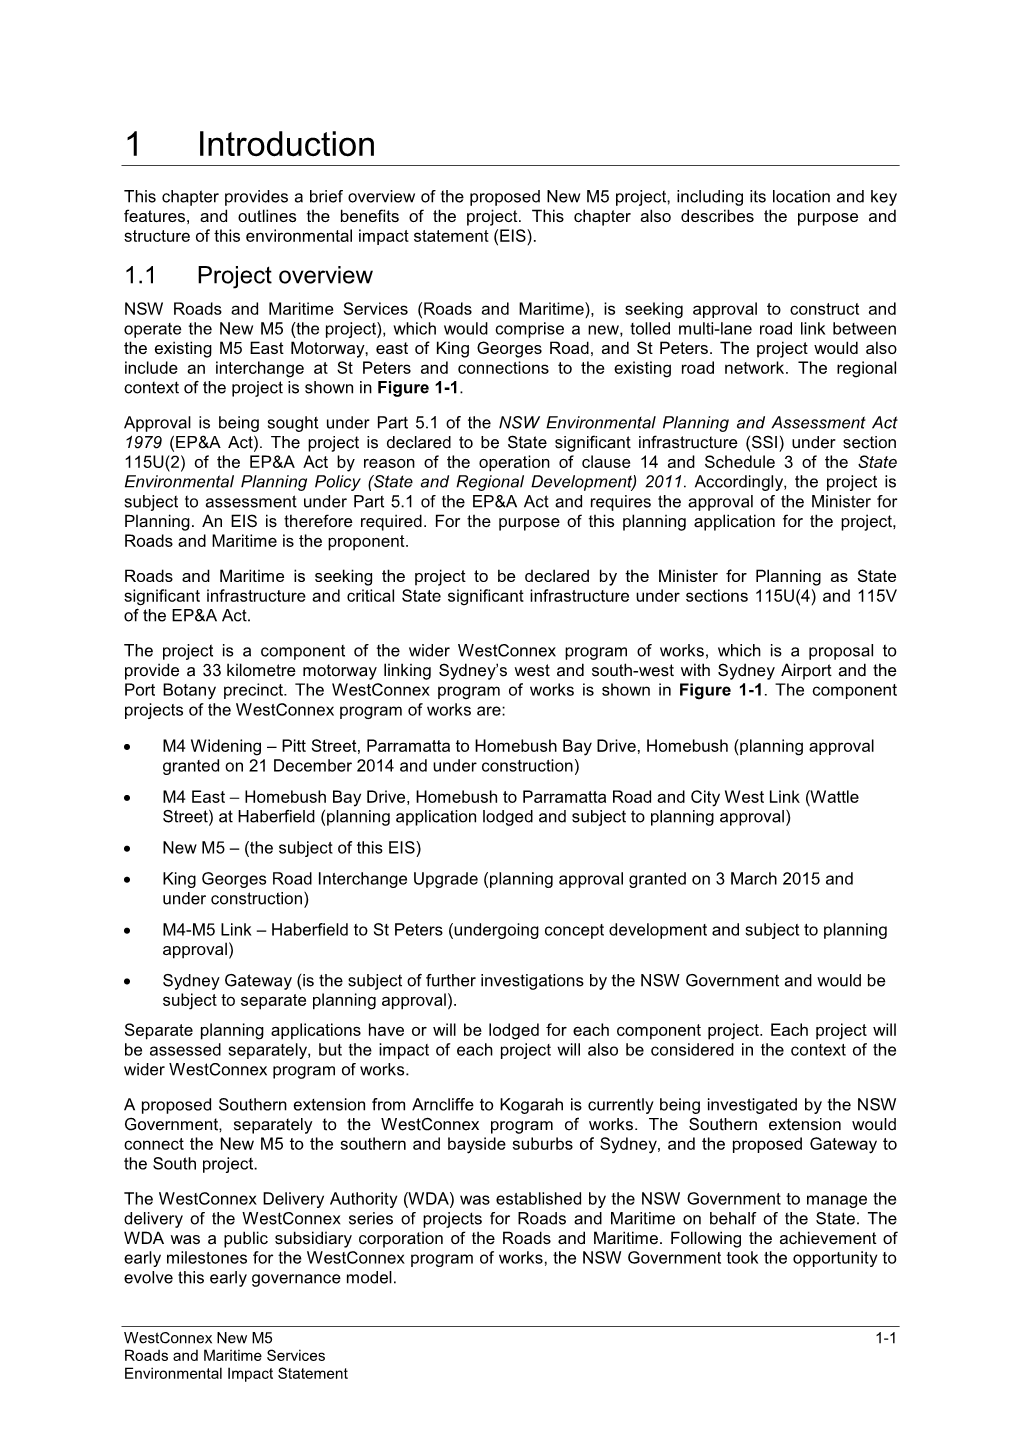 Westconnex New M5 1-1 Roads and Maritime Services Environmental Impact Statement